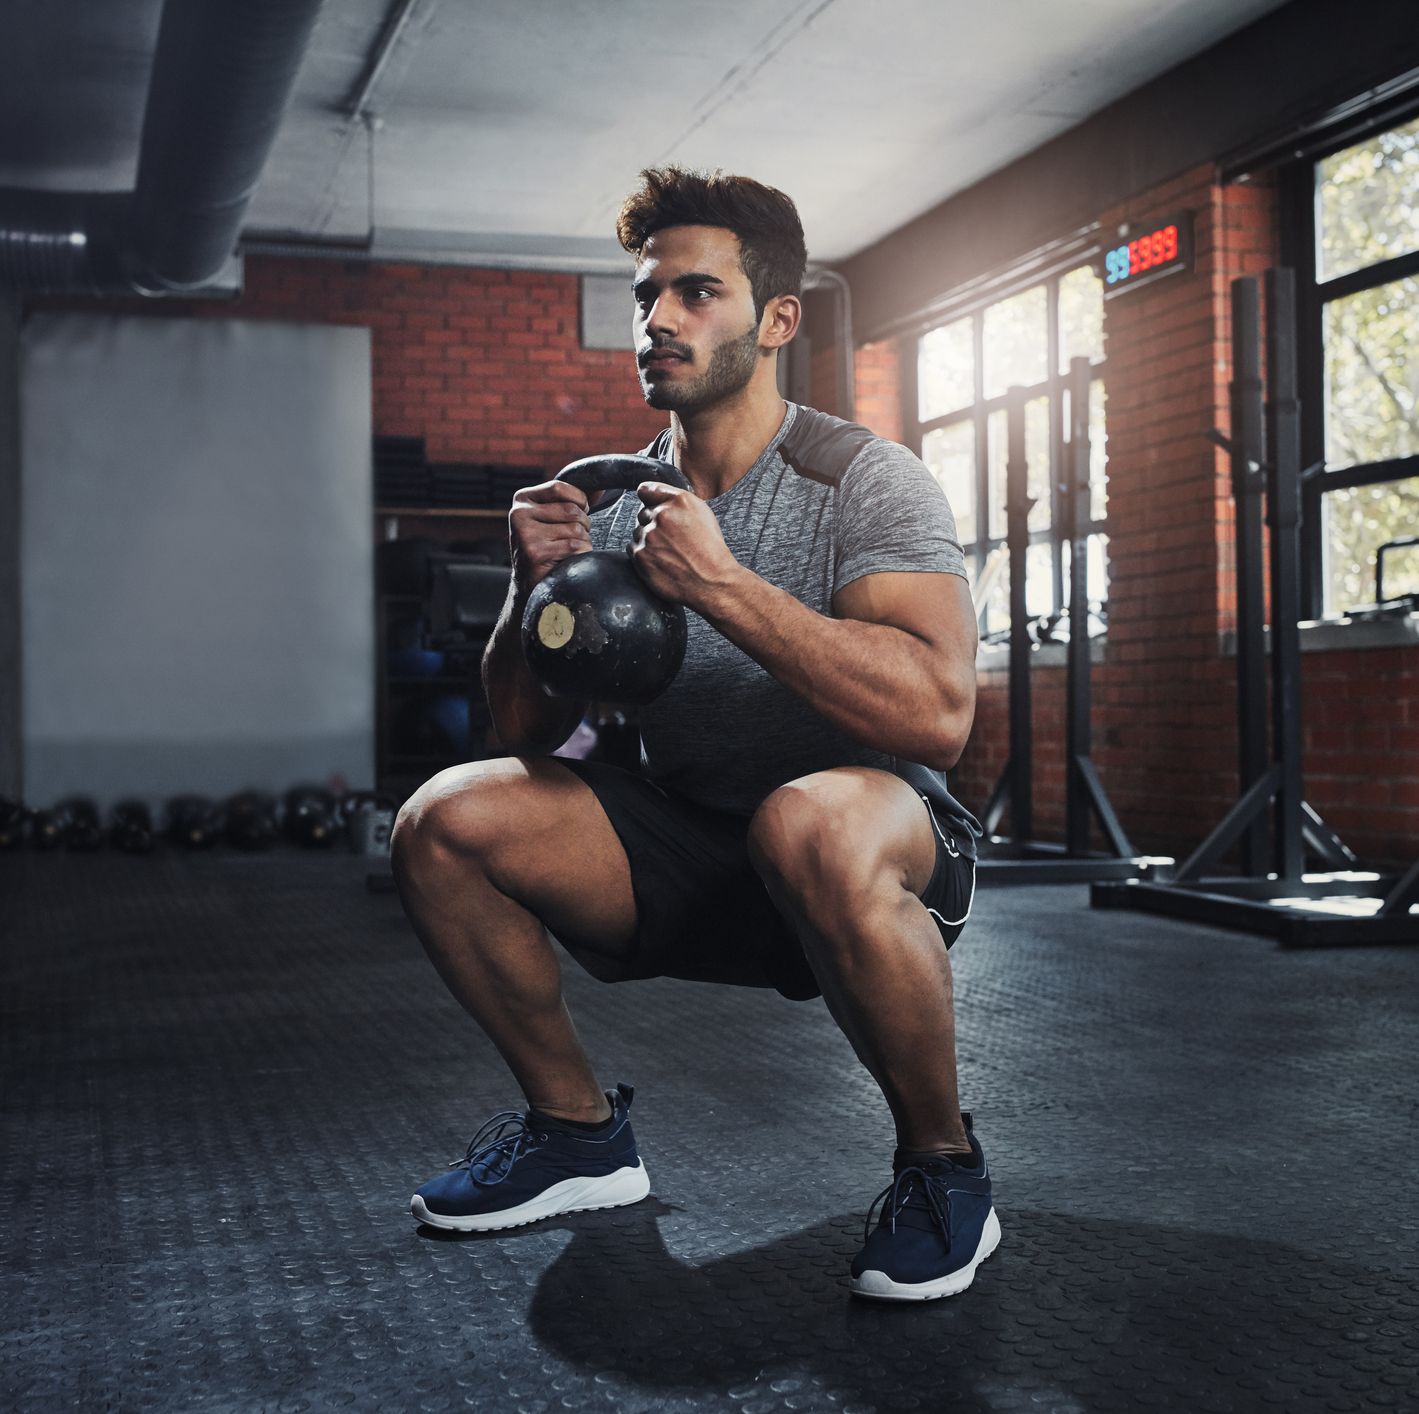 The Best Leg Exercises to Build a Stronger, More Muscular Lower Body